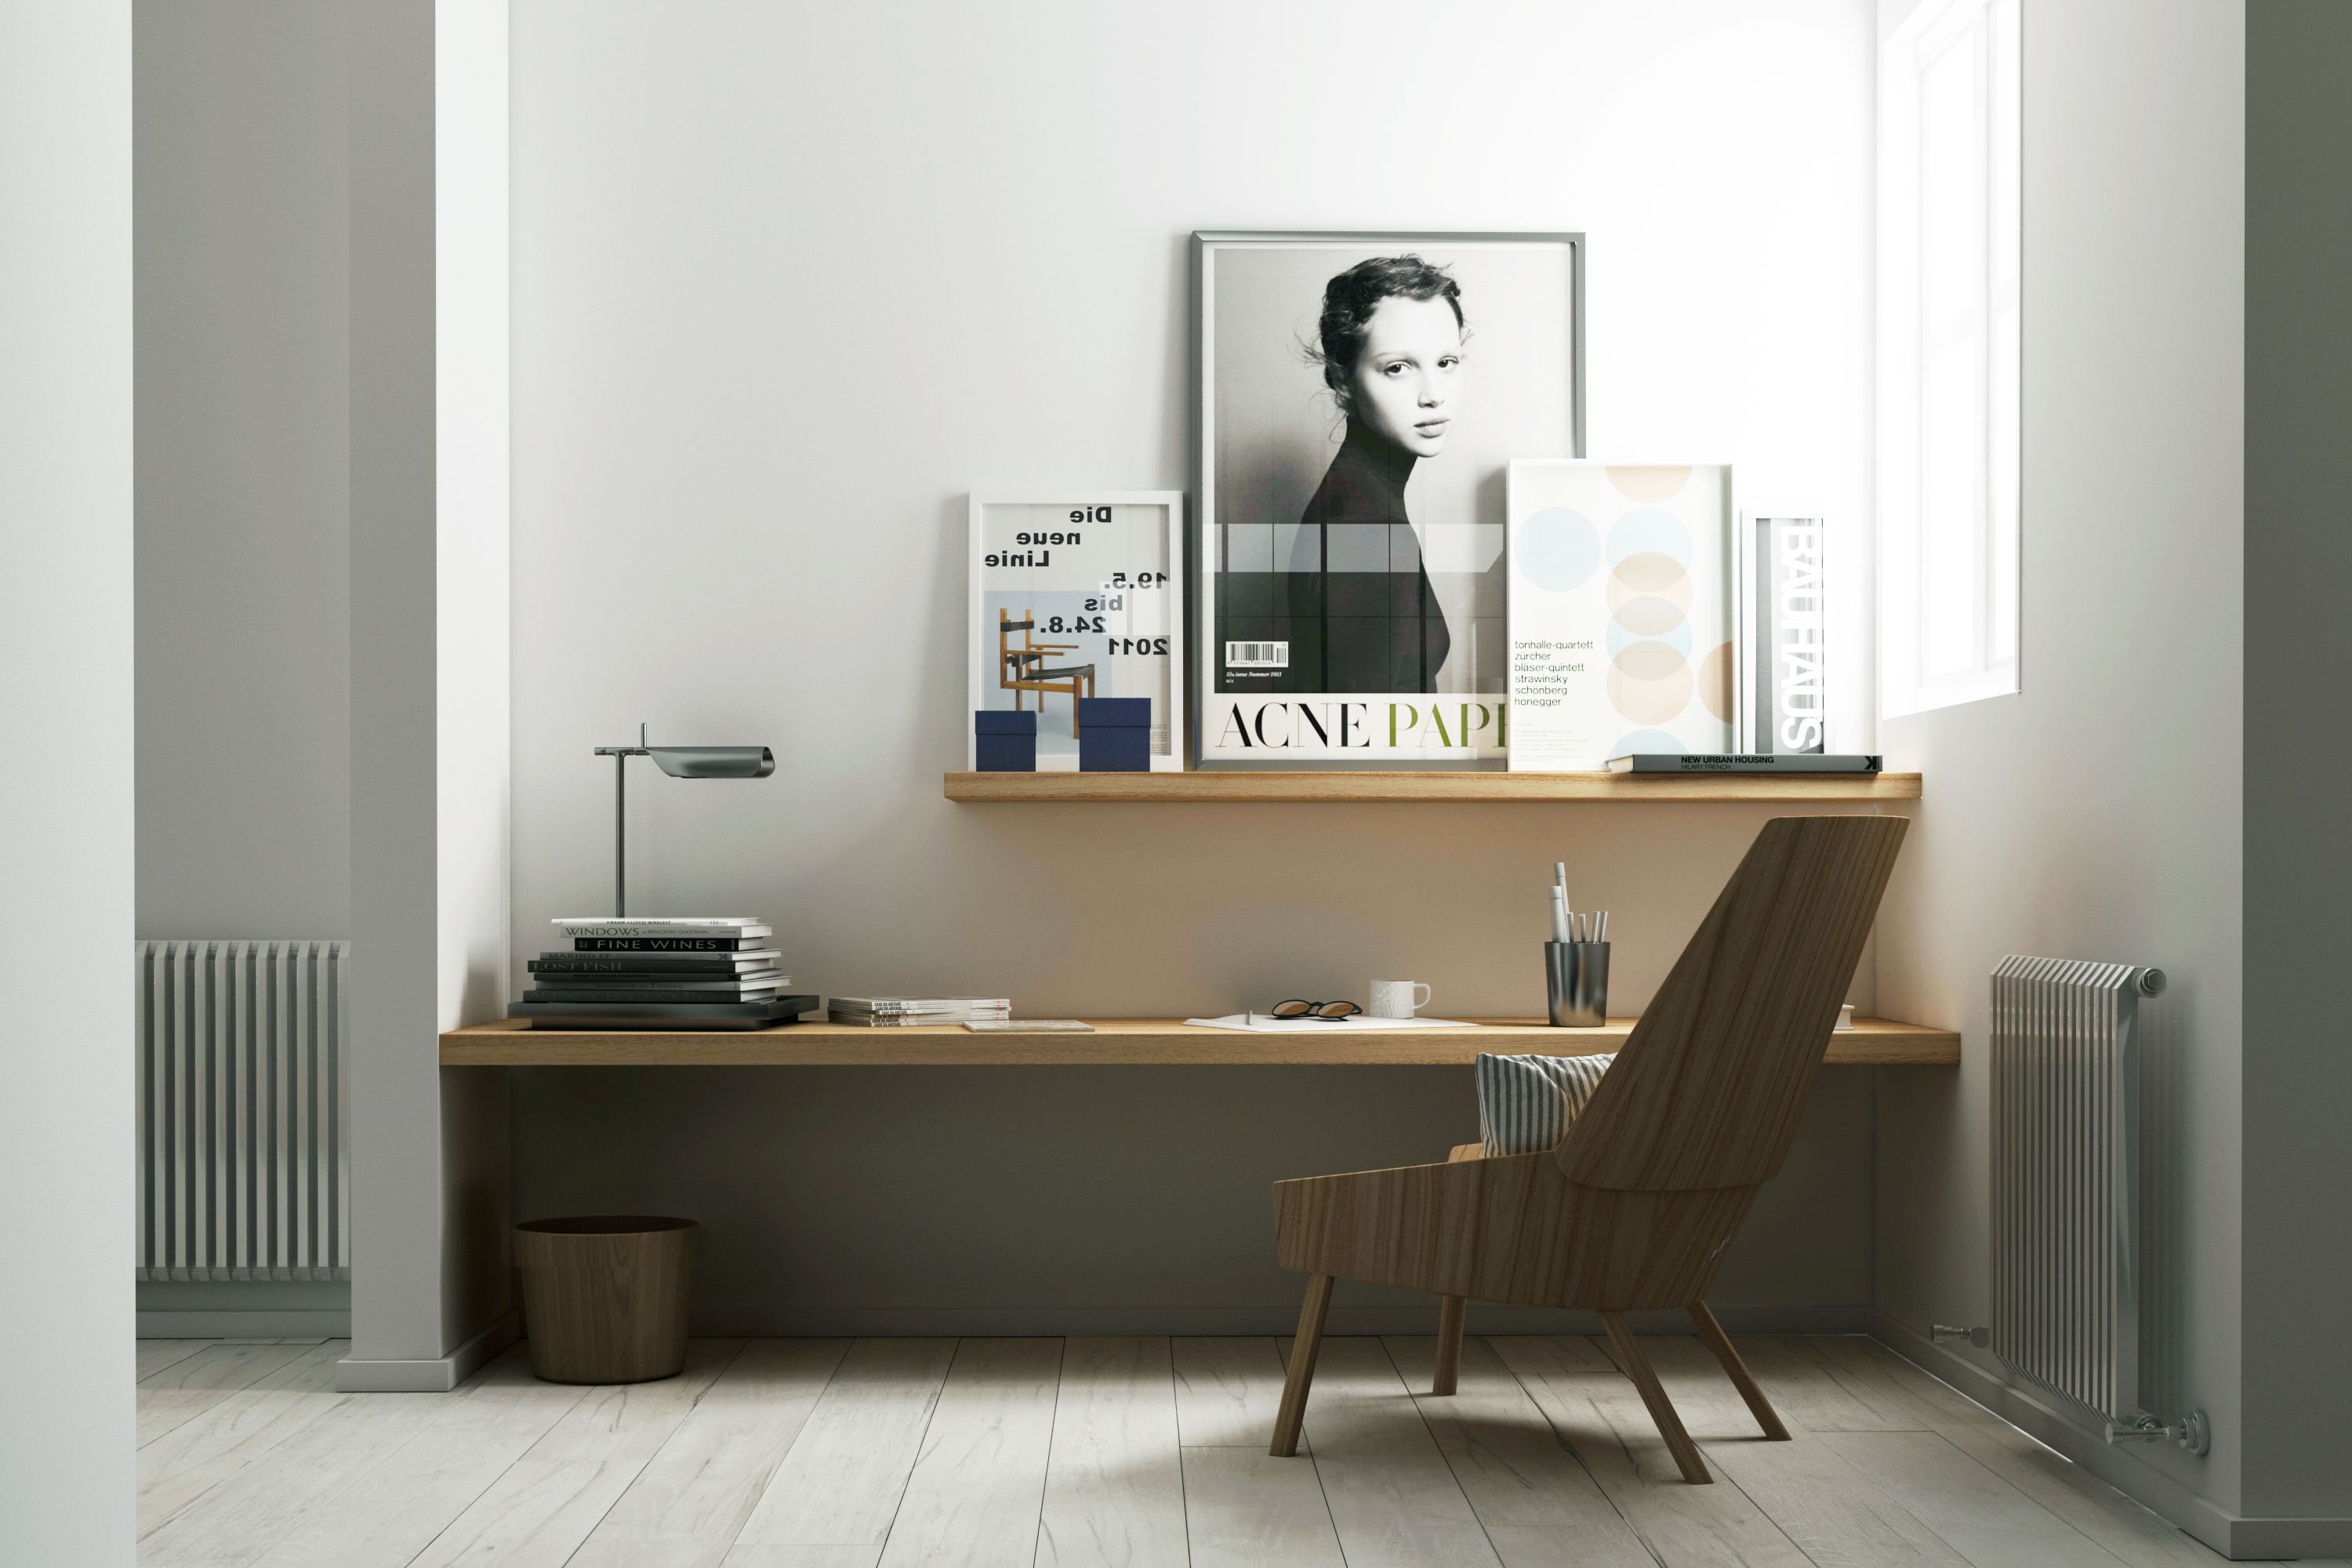 5 home office decorating ideas for your small workspace, by UK Concept  Designer